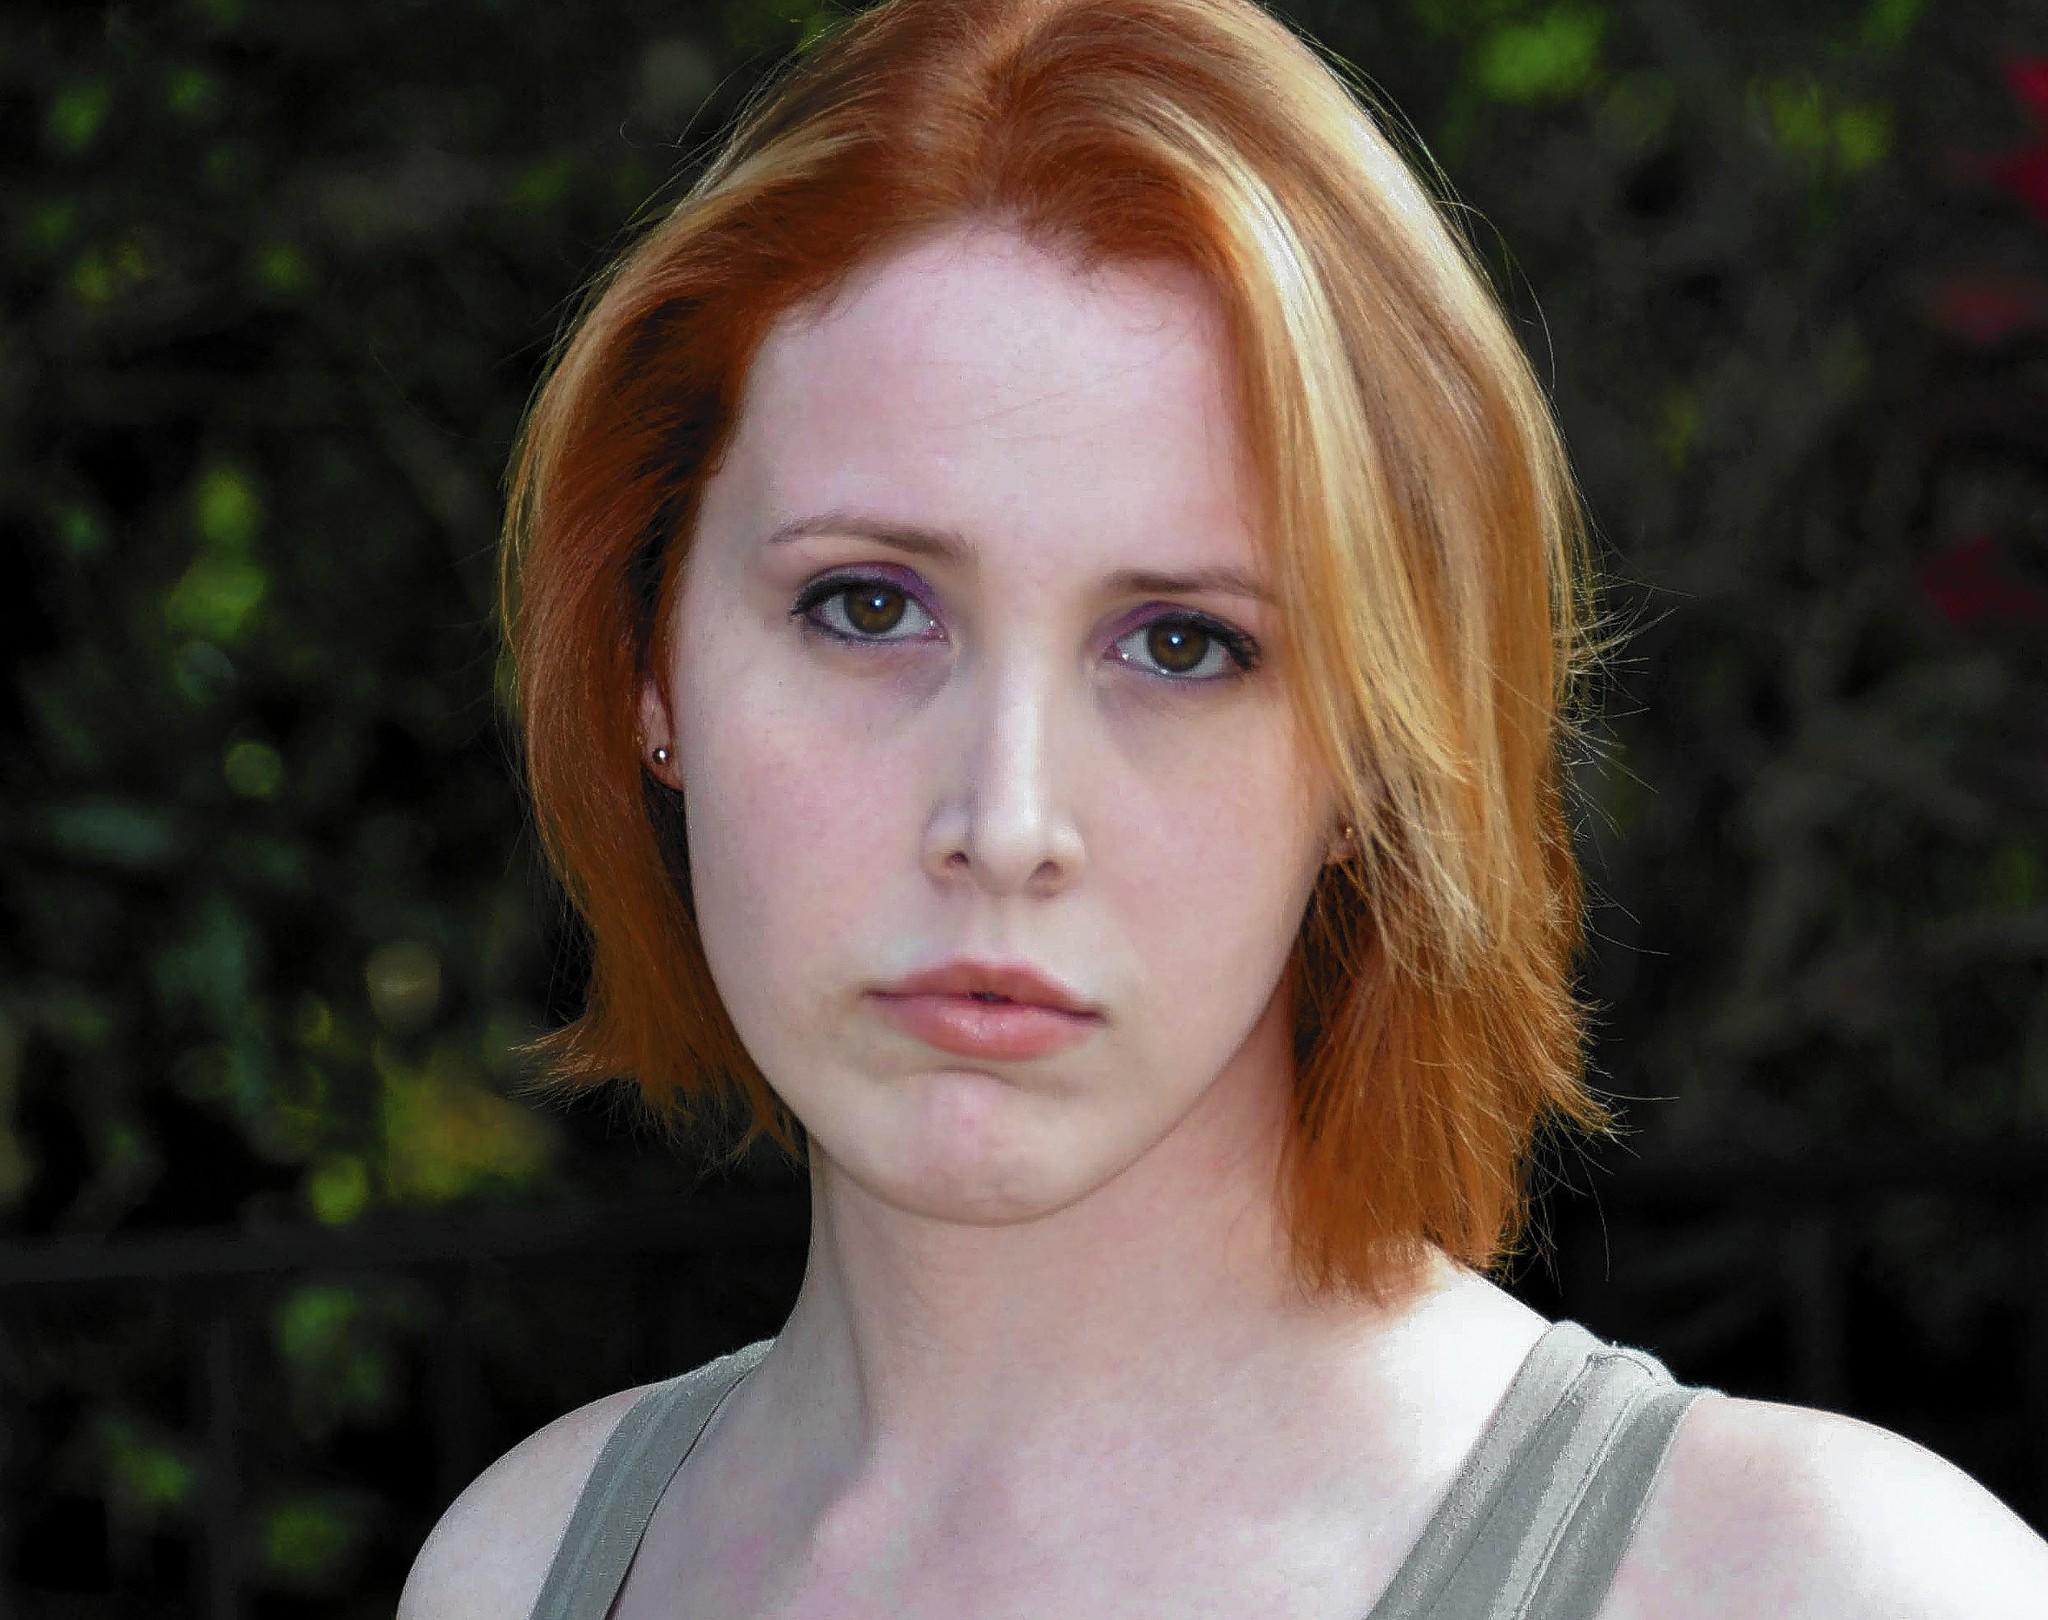 Dylan Farrow on Woody Allen: 'Why shouldn't I want to bring him down?' - LA Times